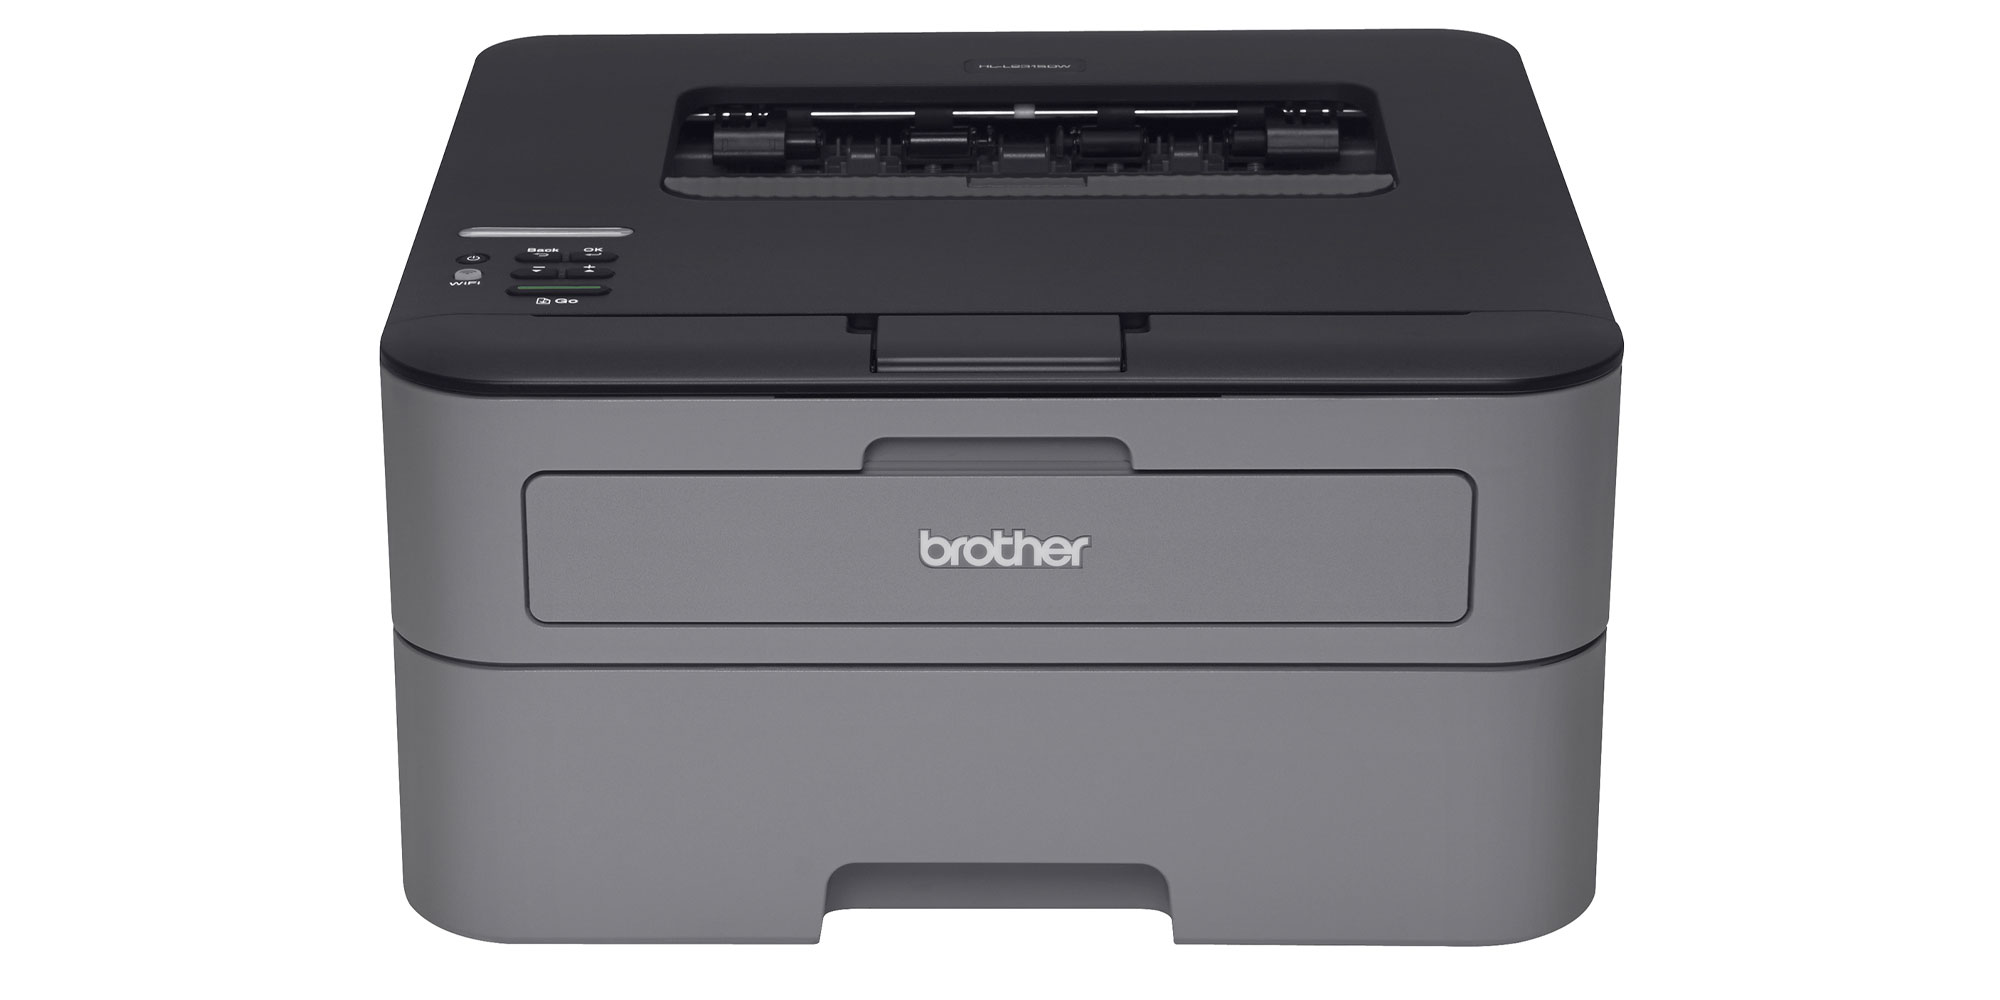 This $79 AirPrint-enabled Brother laser printer is perfect for students & small businesses